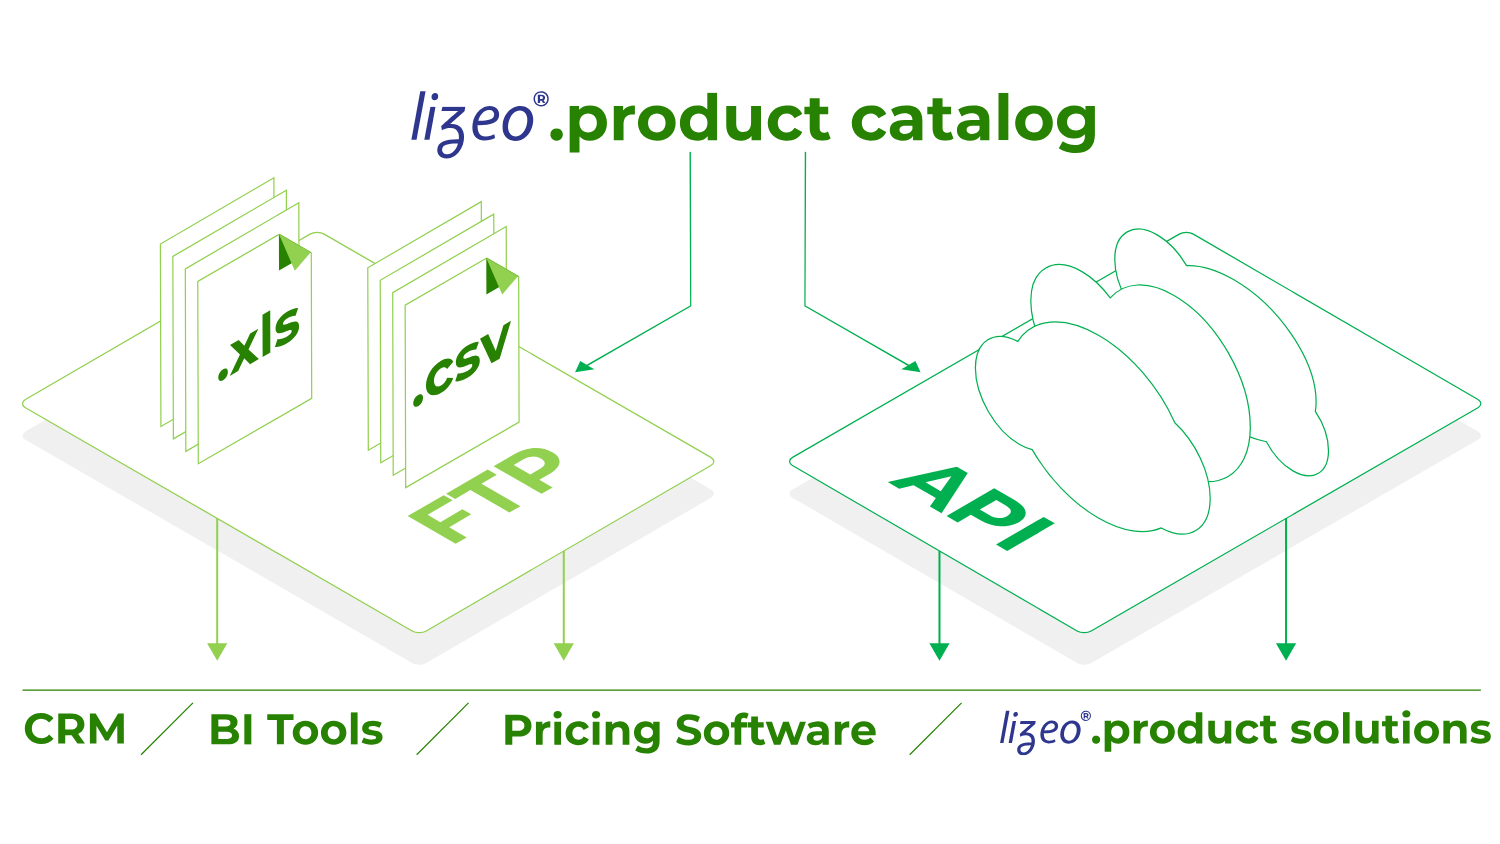 Illustration showing how Lizeo Product Catalog can be delivered in several formats: API, FTP (File Transfer Protocol) or flat files (.xls, .cvs).